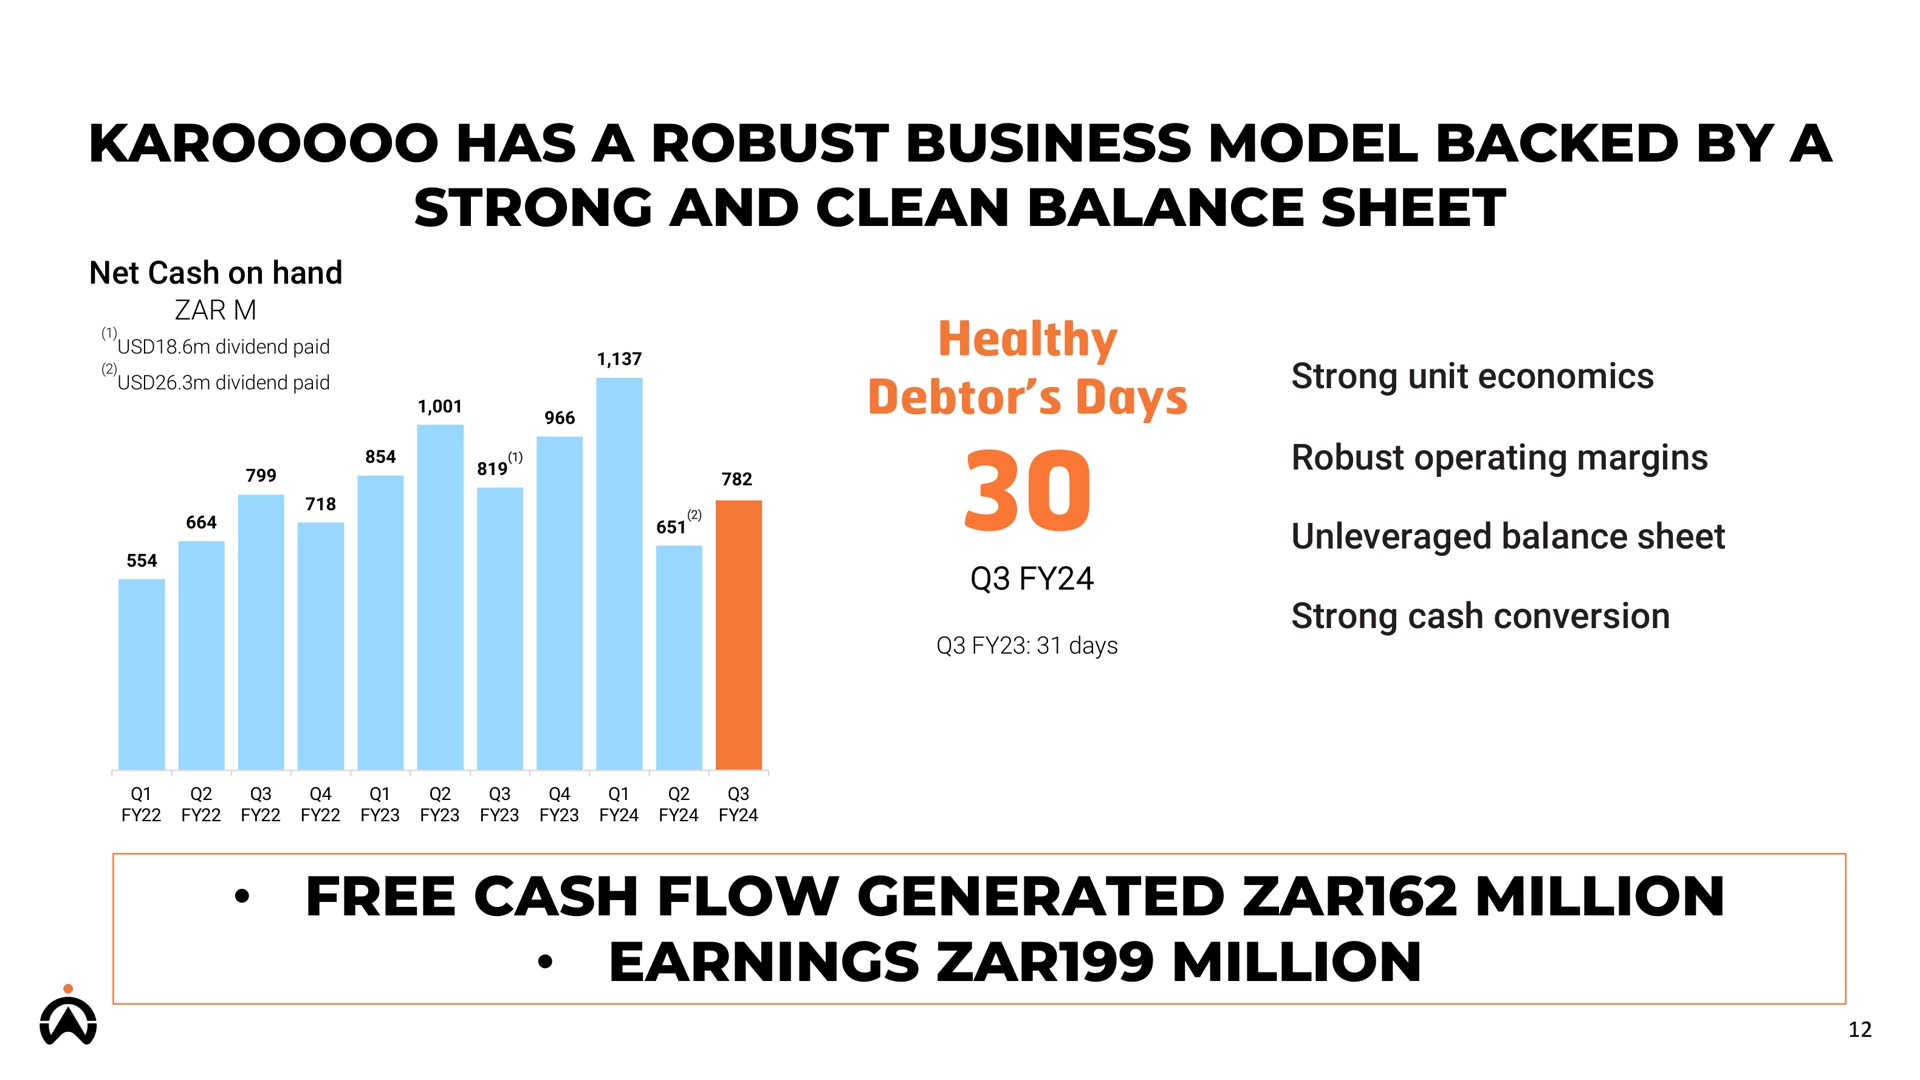 has a robust business model backed by a strong and clean balance sheet free cash flow generated zar million earnings zar million | Karooooo